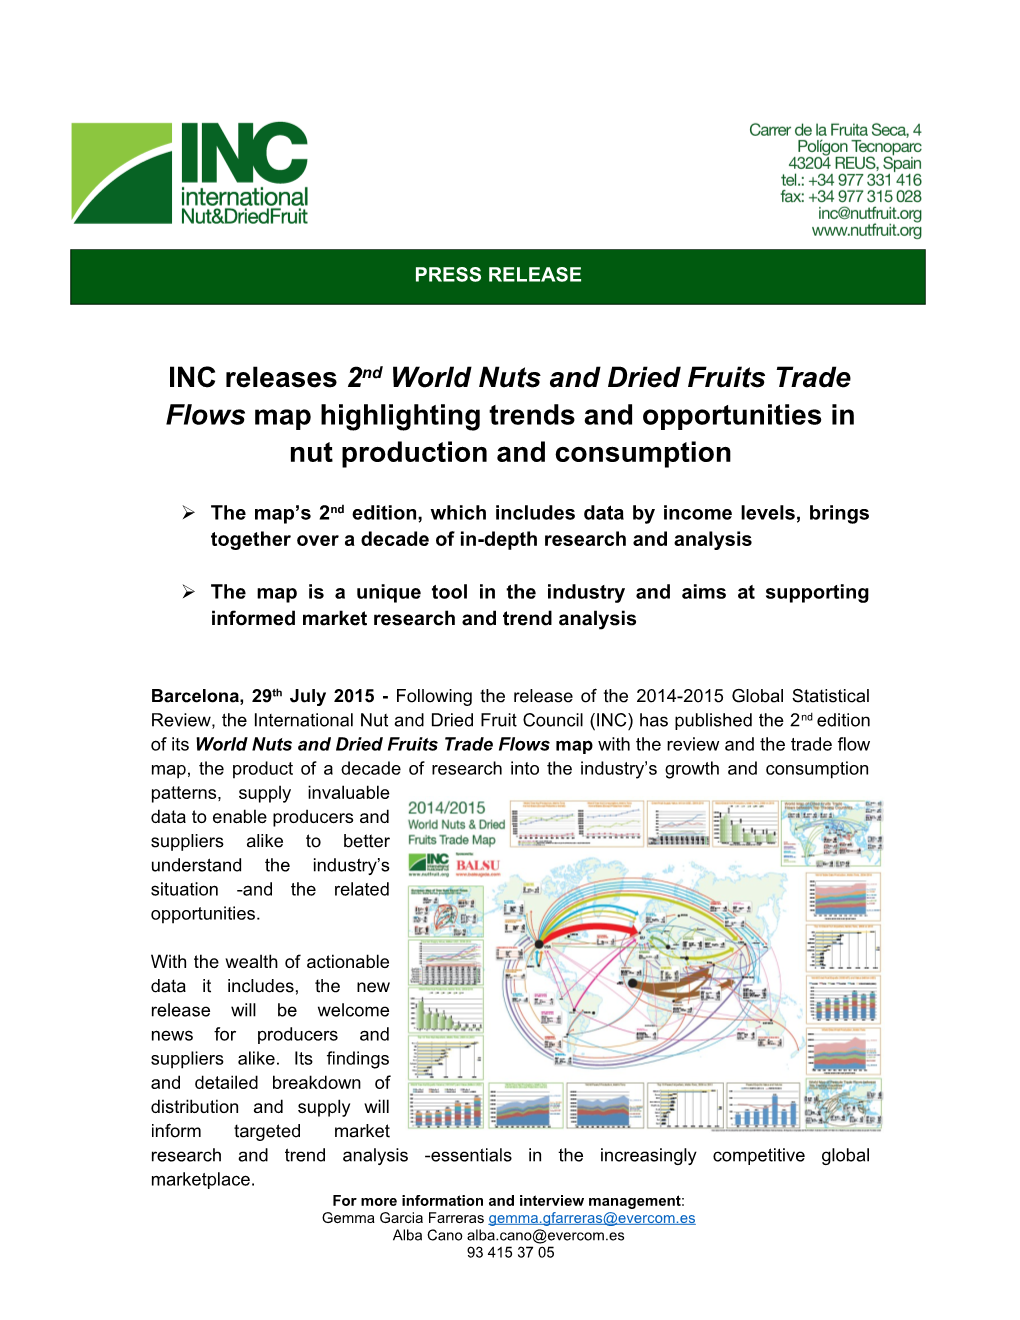 INC Releases 2Nd World Nuts and Dried Fruits Trade Flowsmap Highlighting Trends And